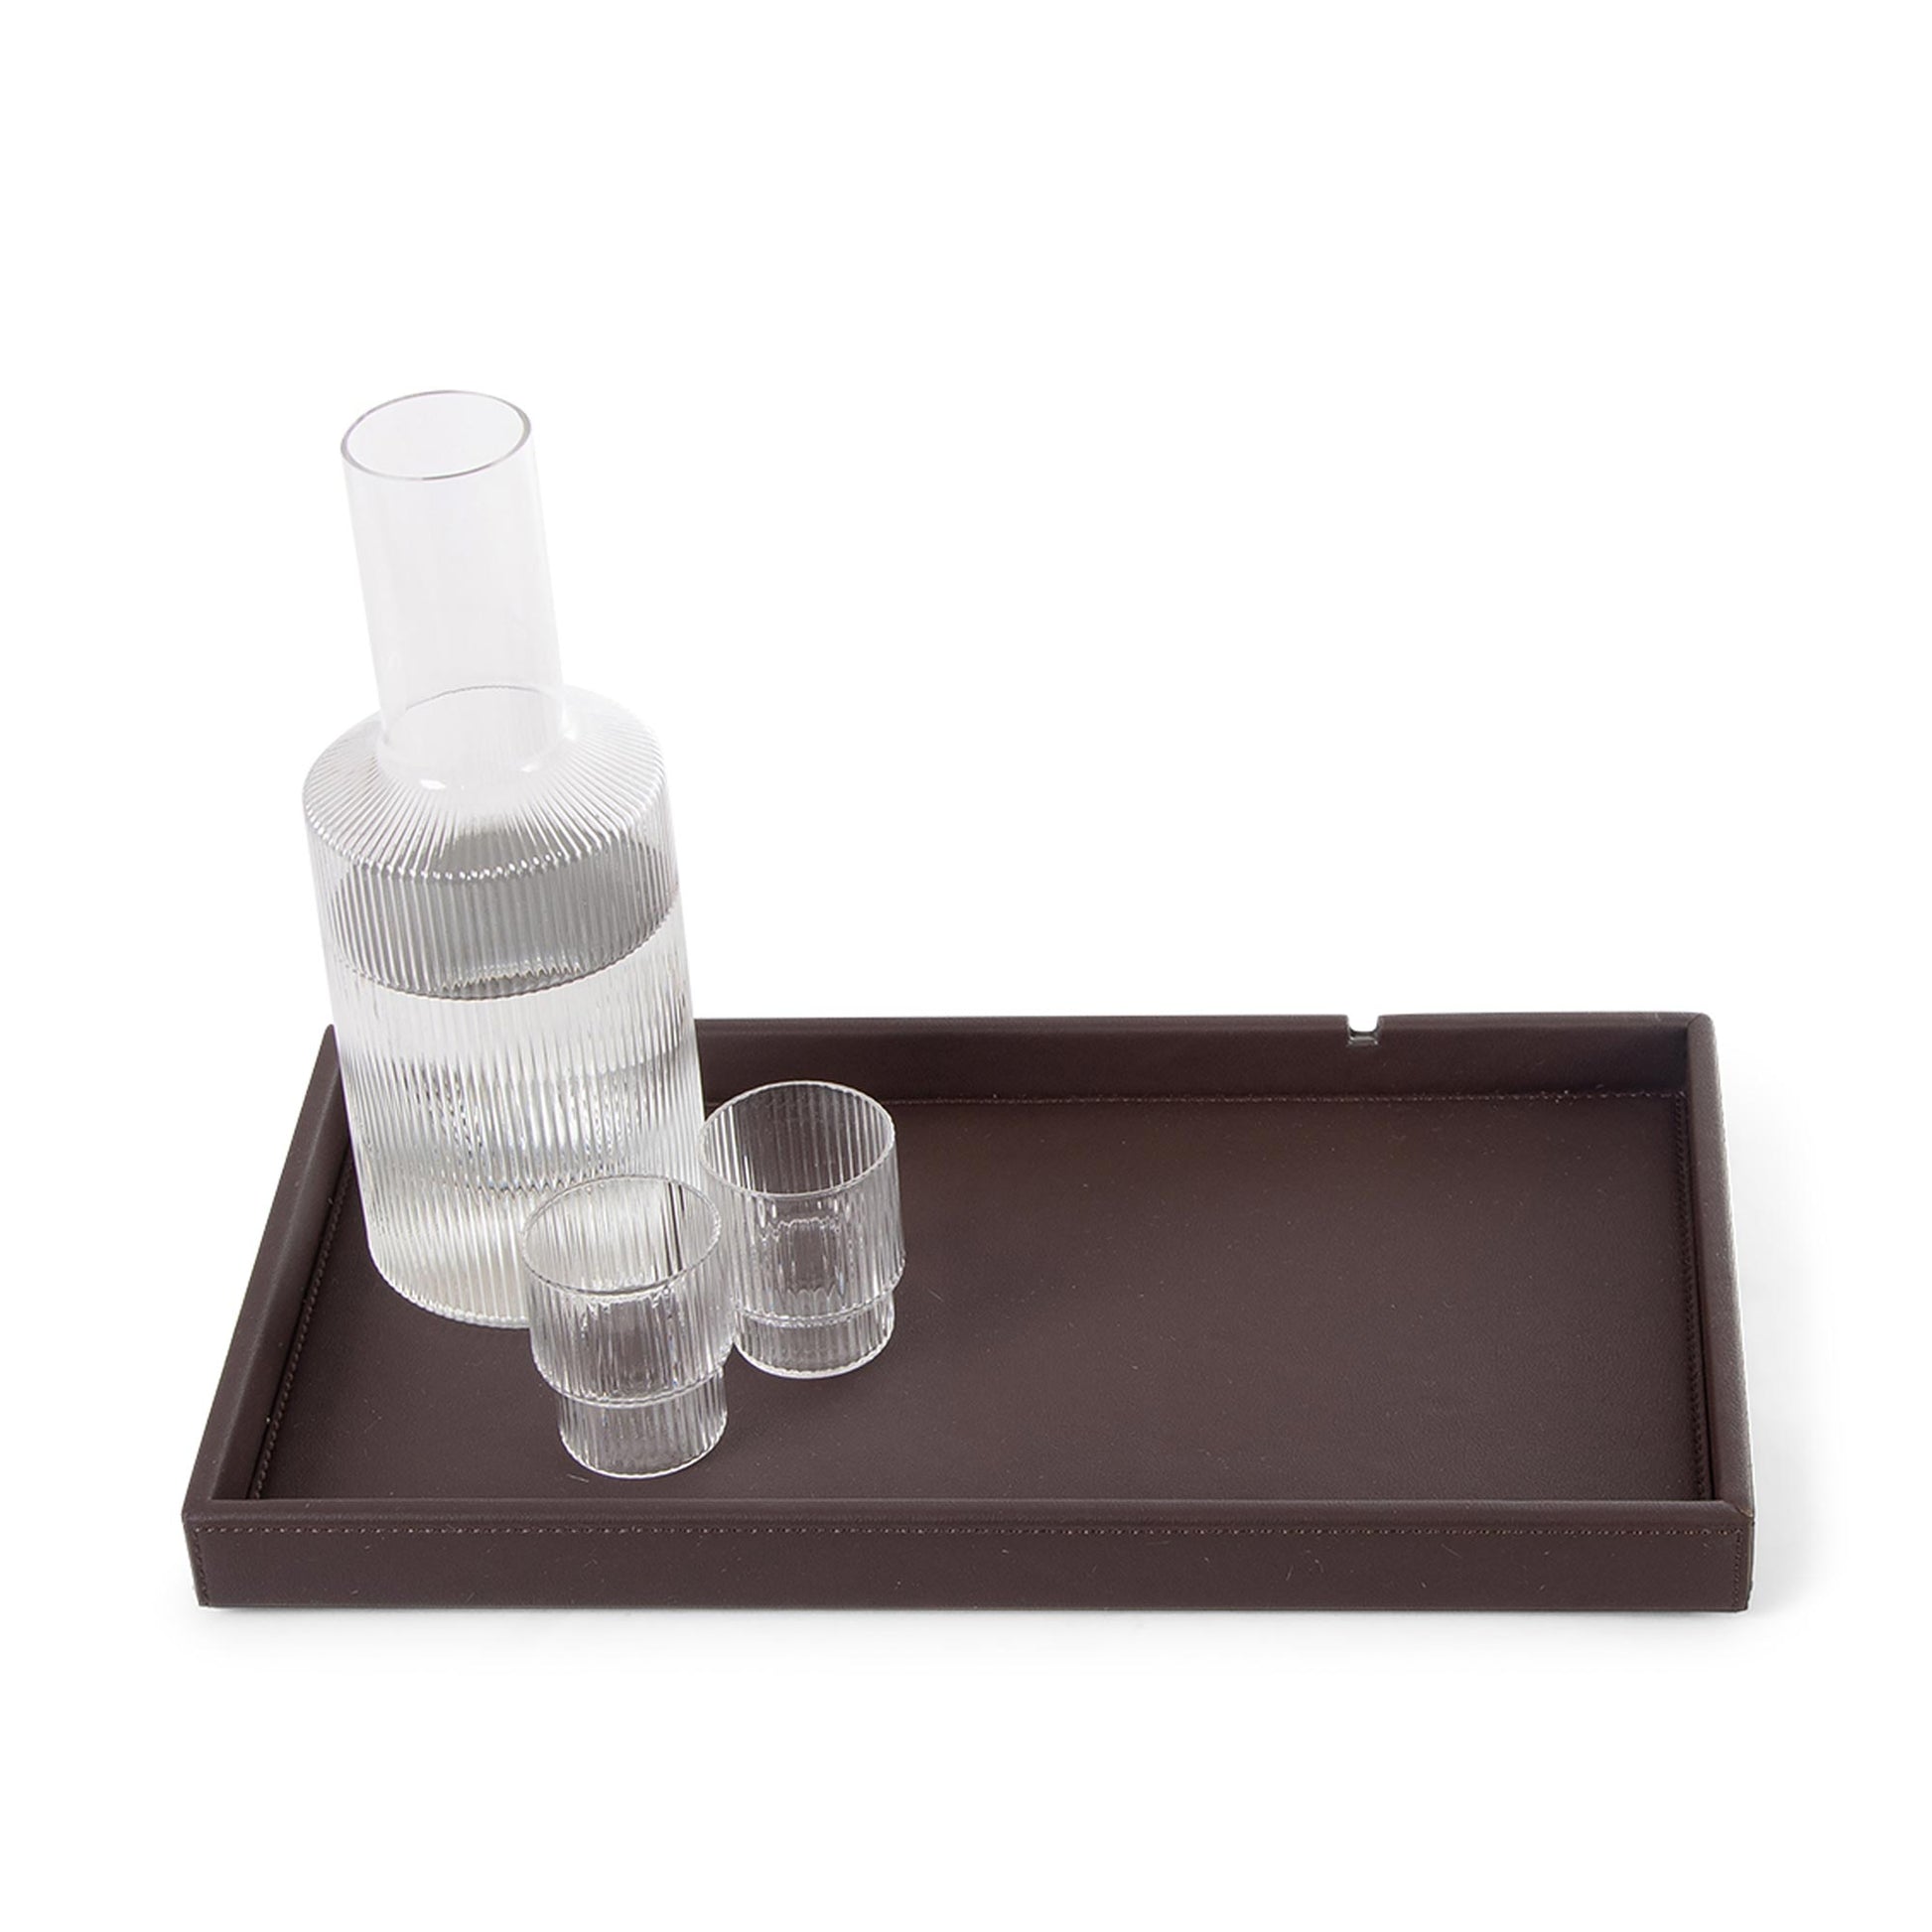 Bentley Etna brown leather hotel welcome tray with glassware